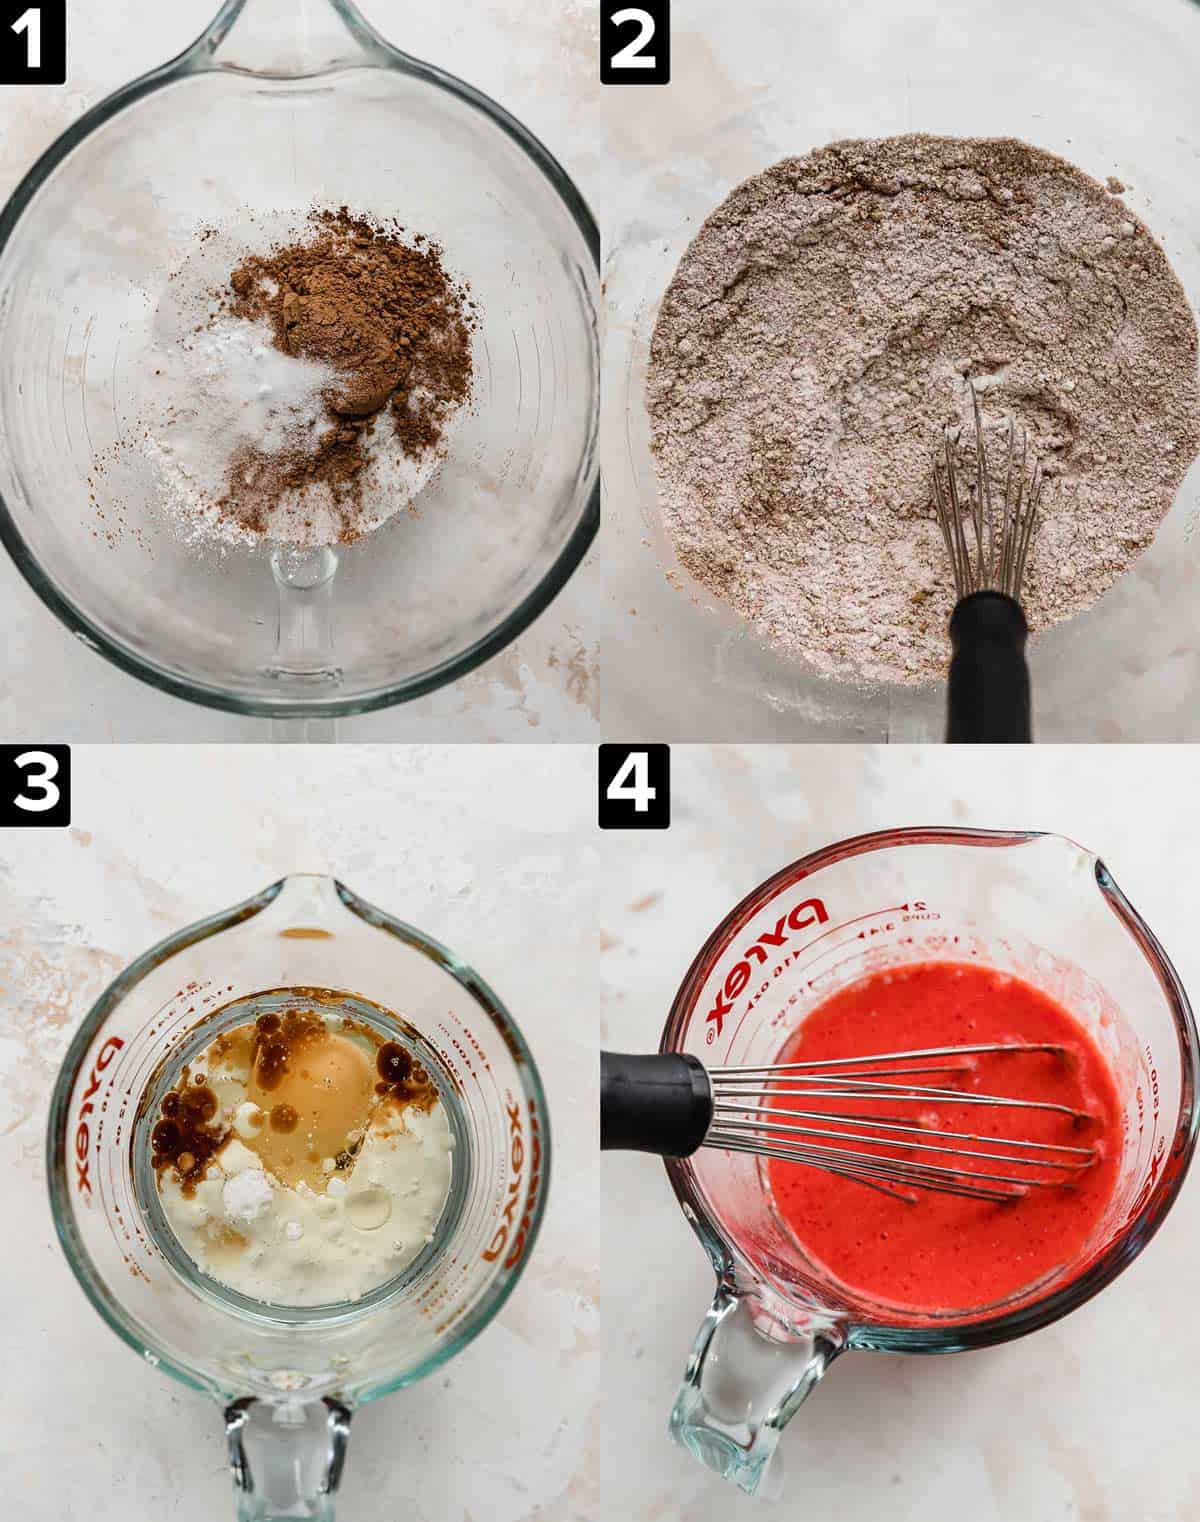 Four images showing how to make Red Velvet Cupcakes. Top left has dry ingredients in a glass bowl, top right photo is a whisk mixing the dry ingredients. Bottom left image is wet ingredients and egg in a glass measuring cup, bottom right image is red wet ingredients in measuring cup.